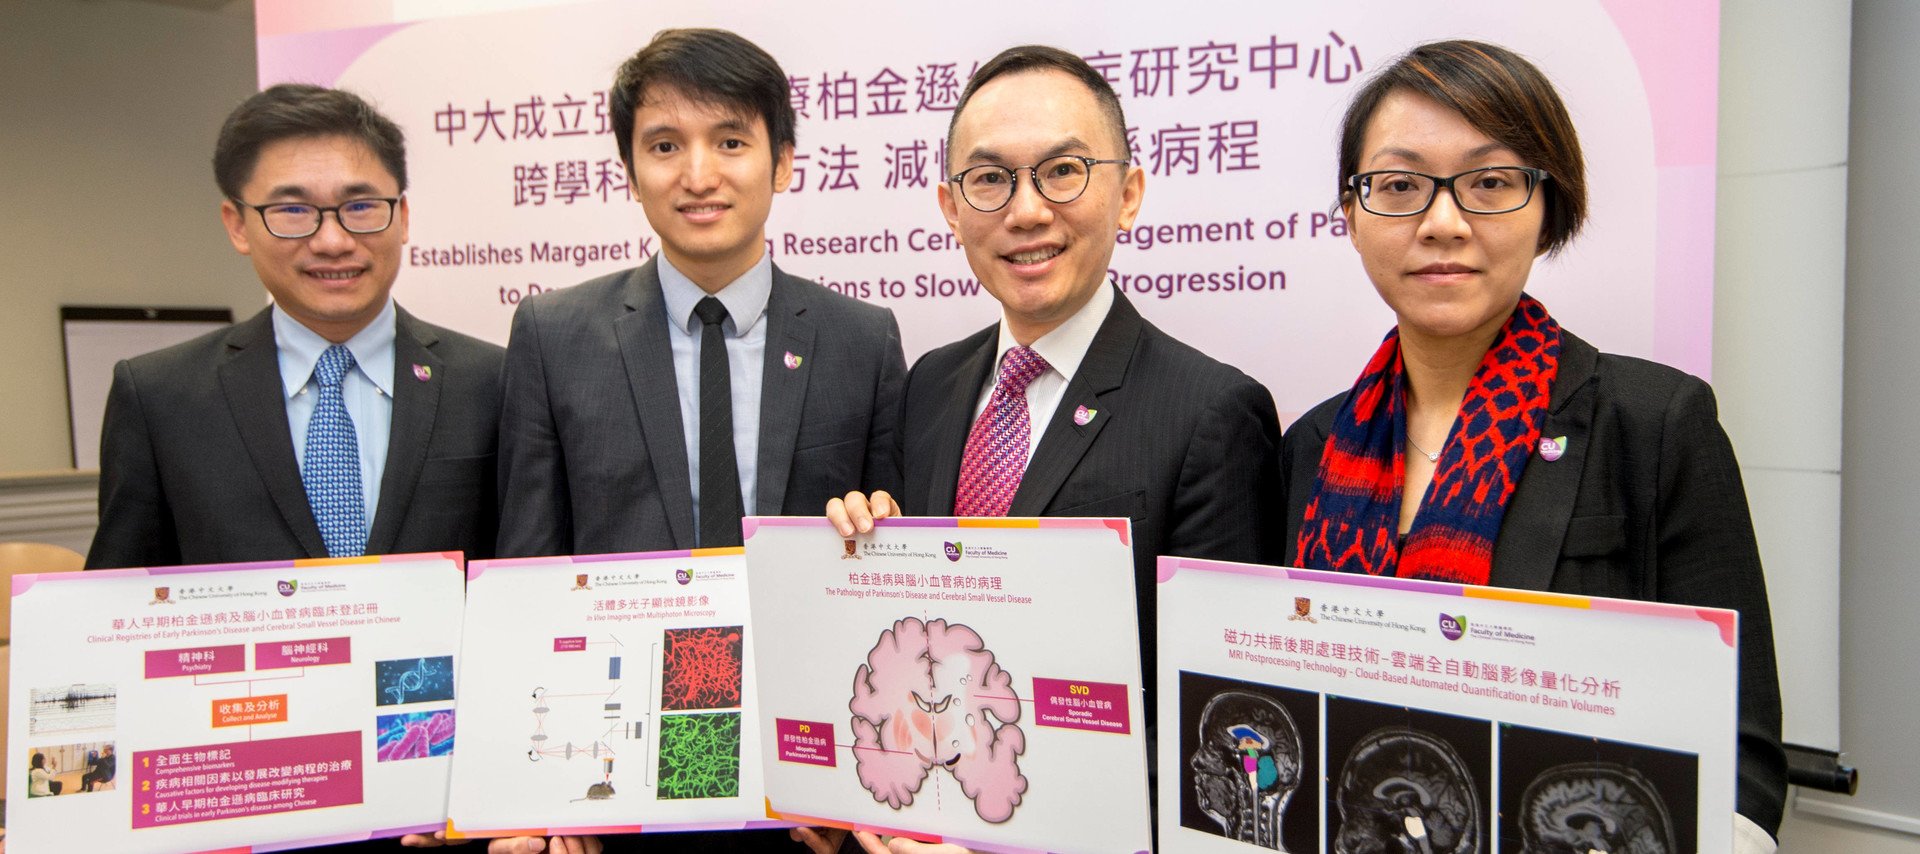 CUHK Establishes Margaret K.L. Cheung Research Centre for Management of Parkinsonism  To Develop Innovative Solutions to Slow Disease Progression